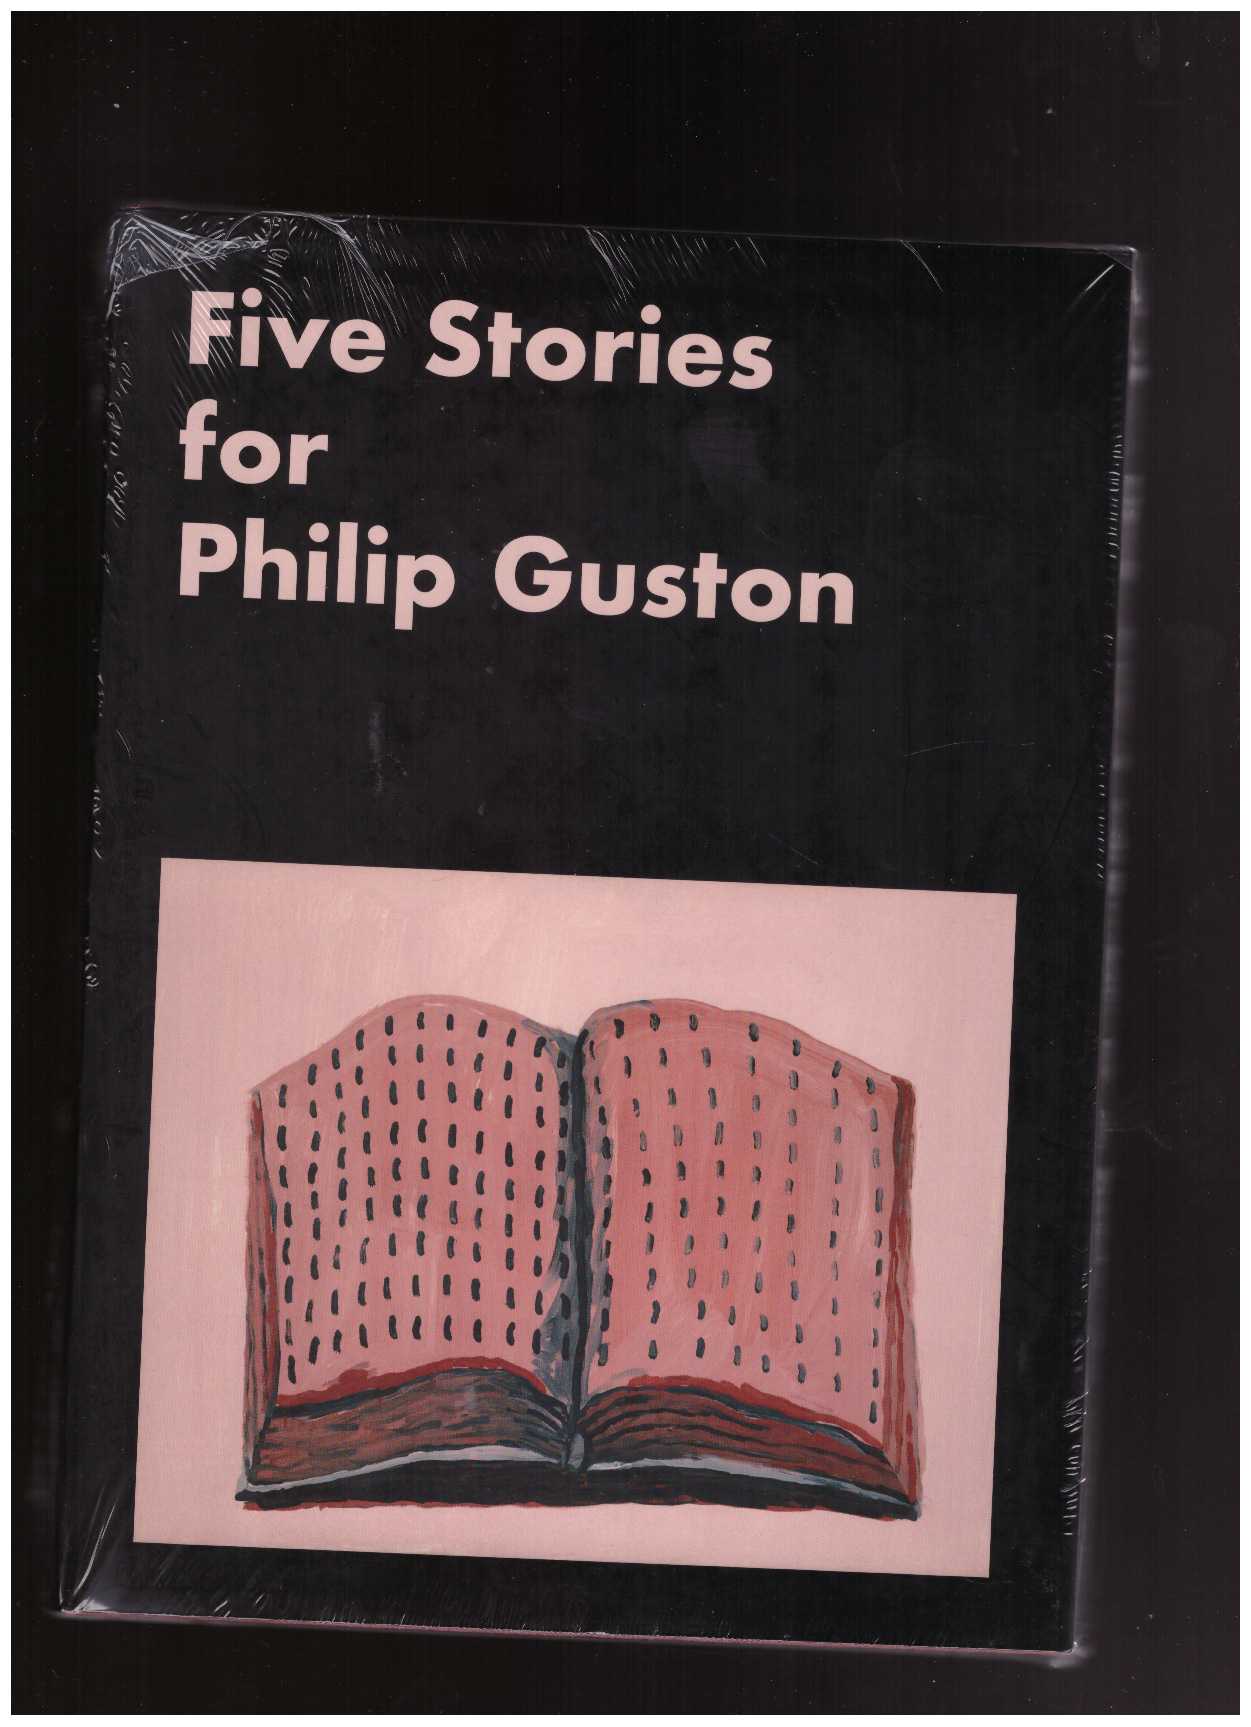 FRANCIS, Emmie; GODFREY, Mark (eds.) - Five Stories for Philip Guston